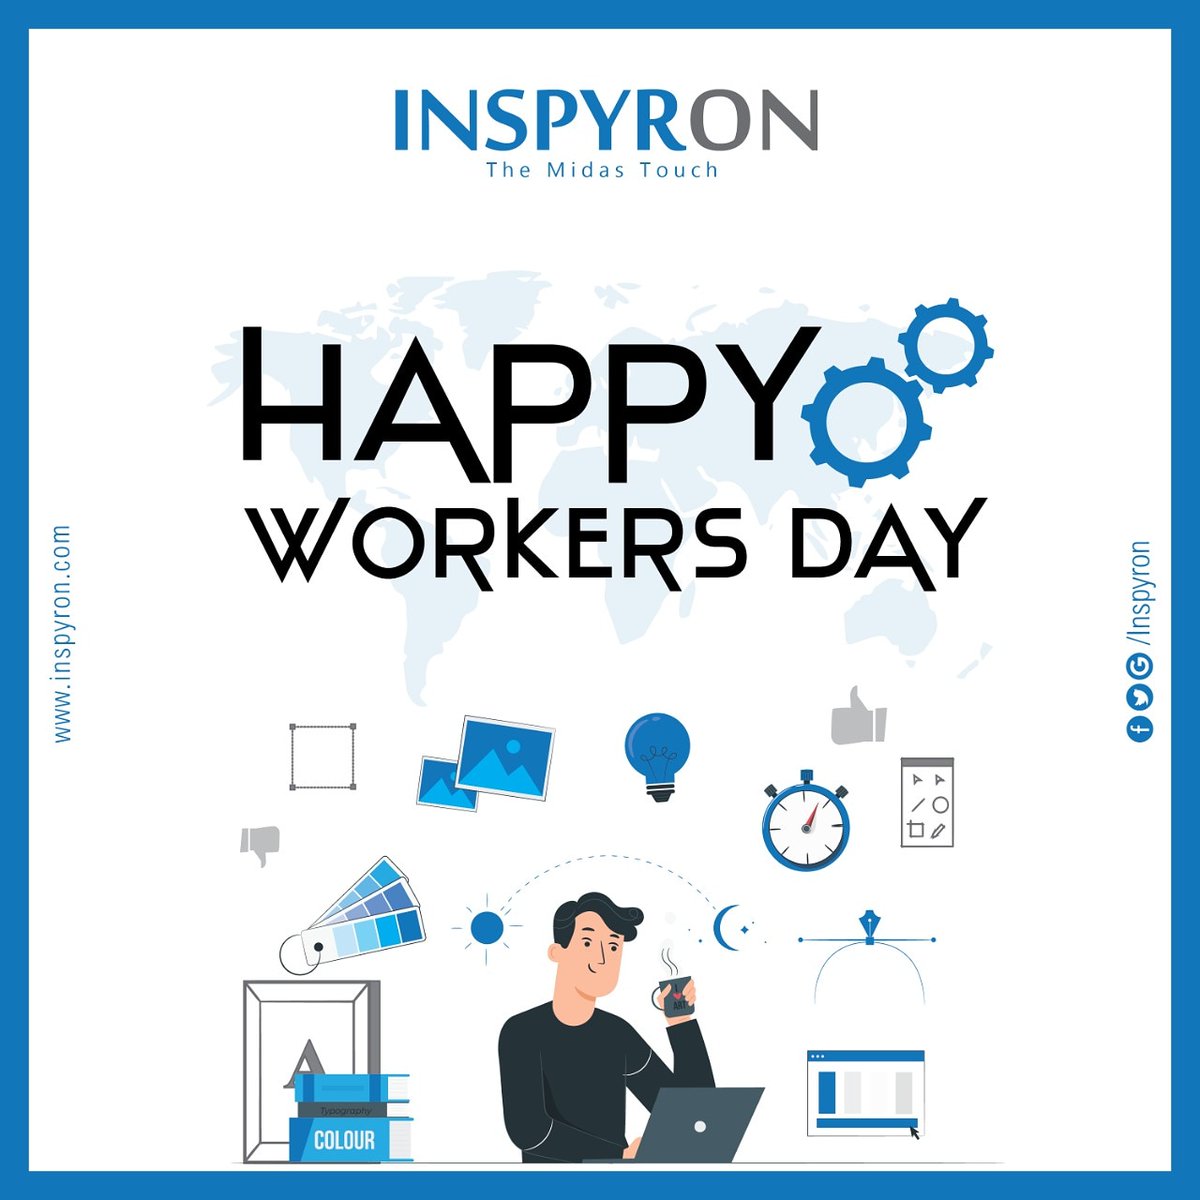 Wishing a Happy Workers Day.
For poster designs whatsapp or call us @ 8973805000
#Inspyron #InspyronWishes #HappyWorkersDay #May1st #SocialMediaPoster #FestivalWishes #InspyronPollachi #InspyronDesign #promodesigns #Branding #pollachi #logodesigner #Coimbatore #brandingmadesimple